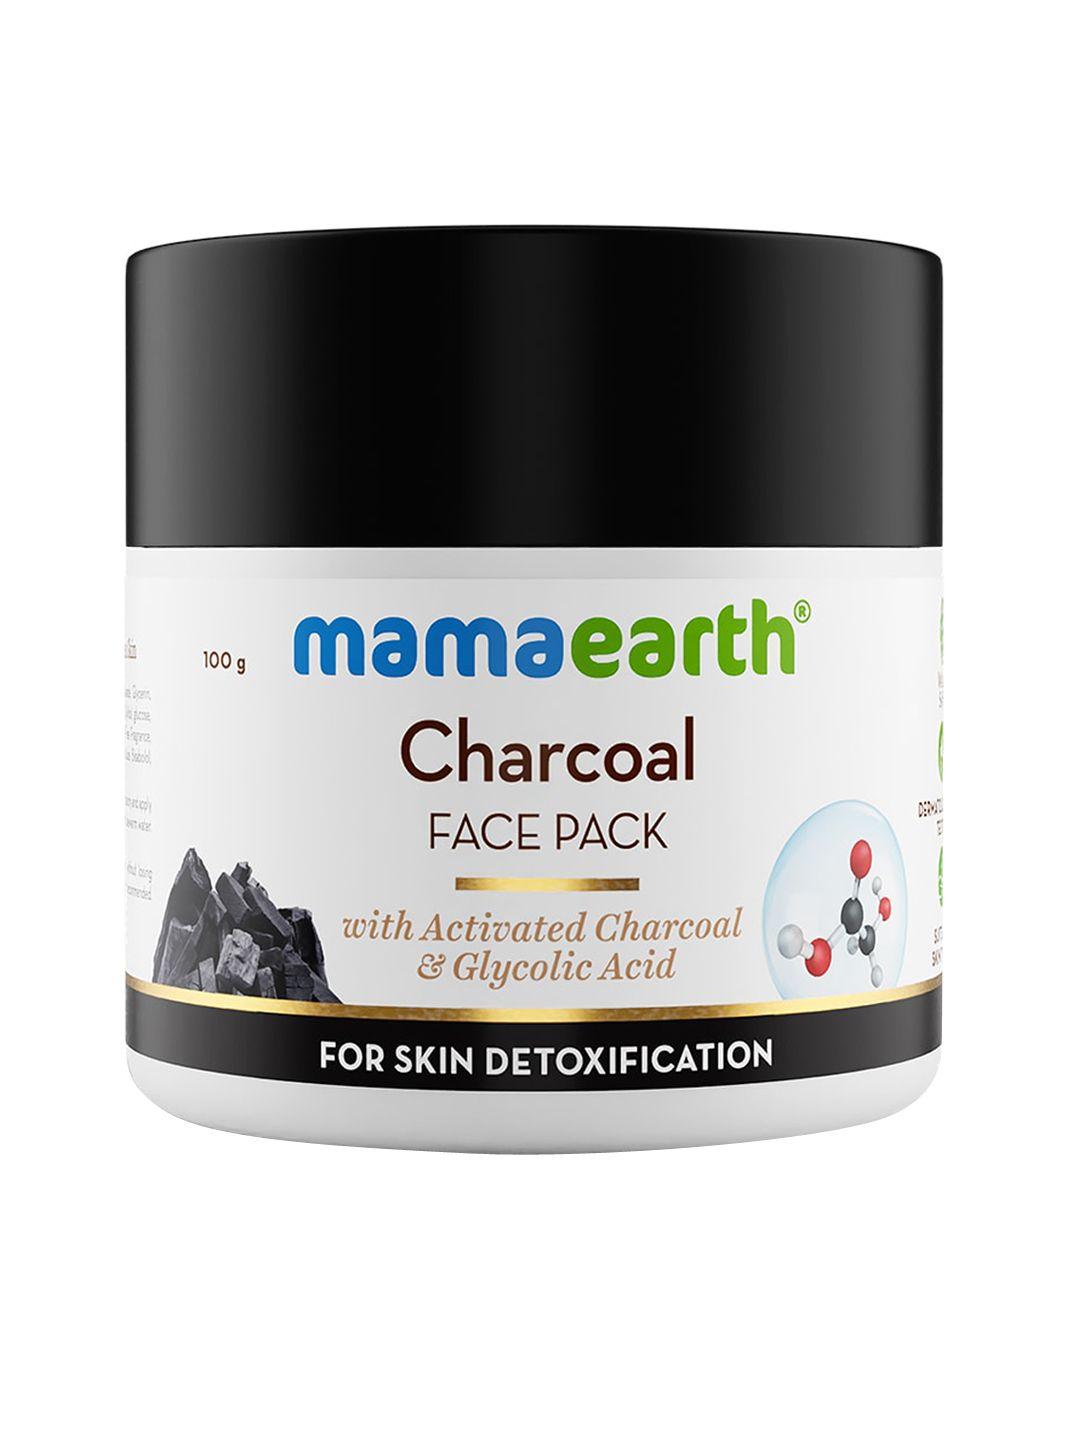 mamaearth face pack with activated charcoal and glycolic acid for skin detoxification-100g